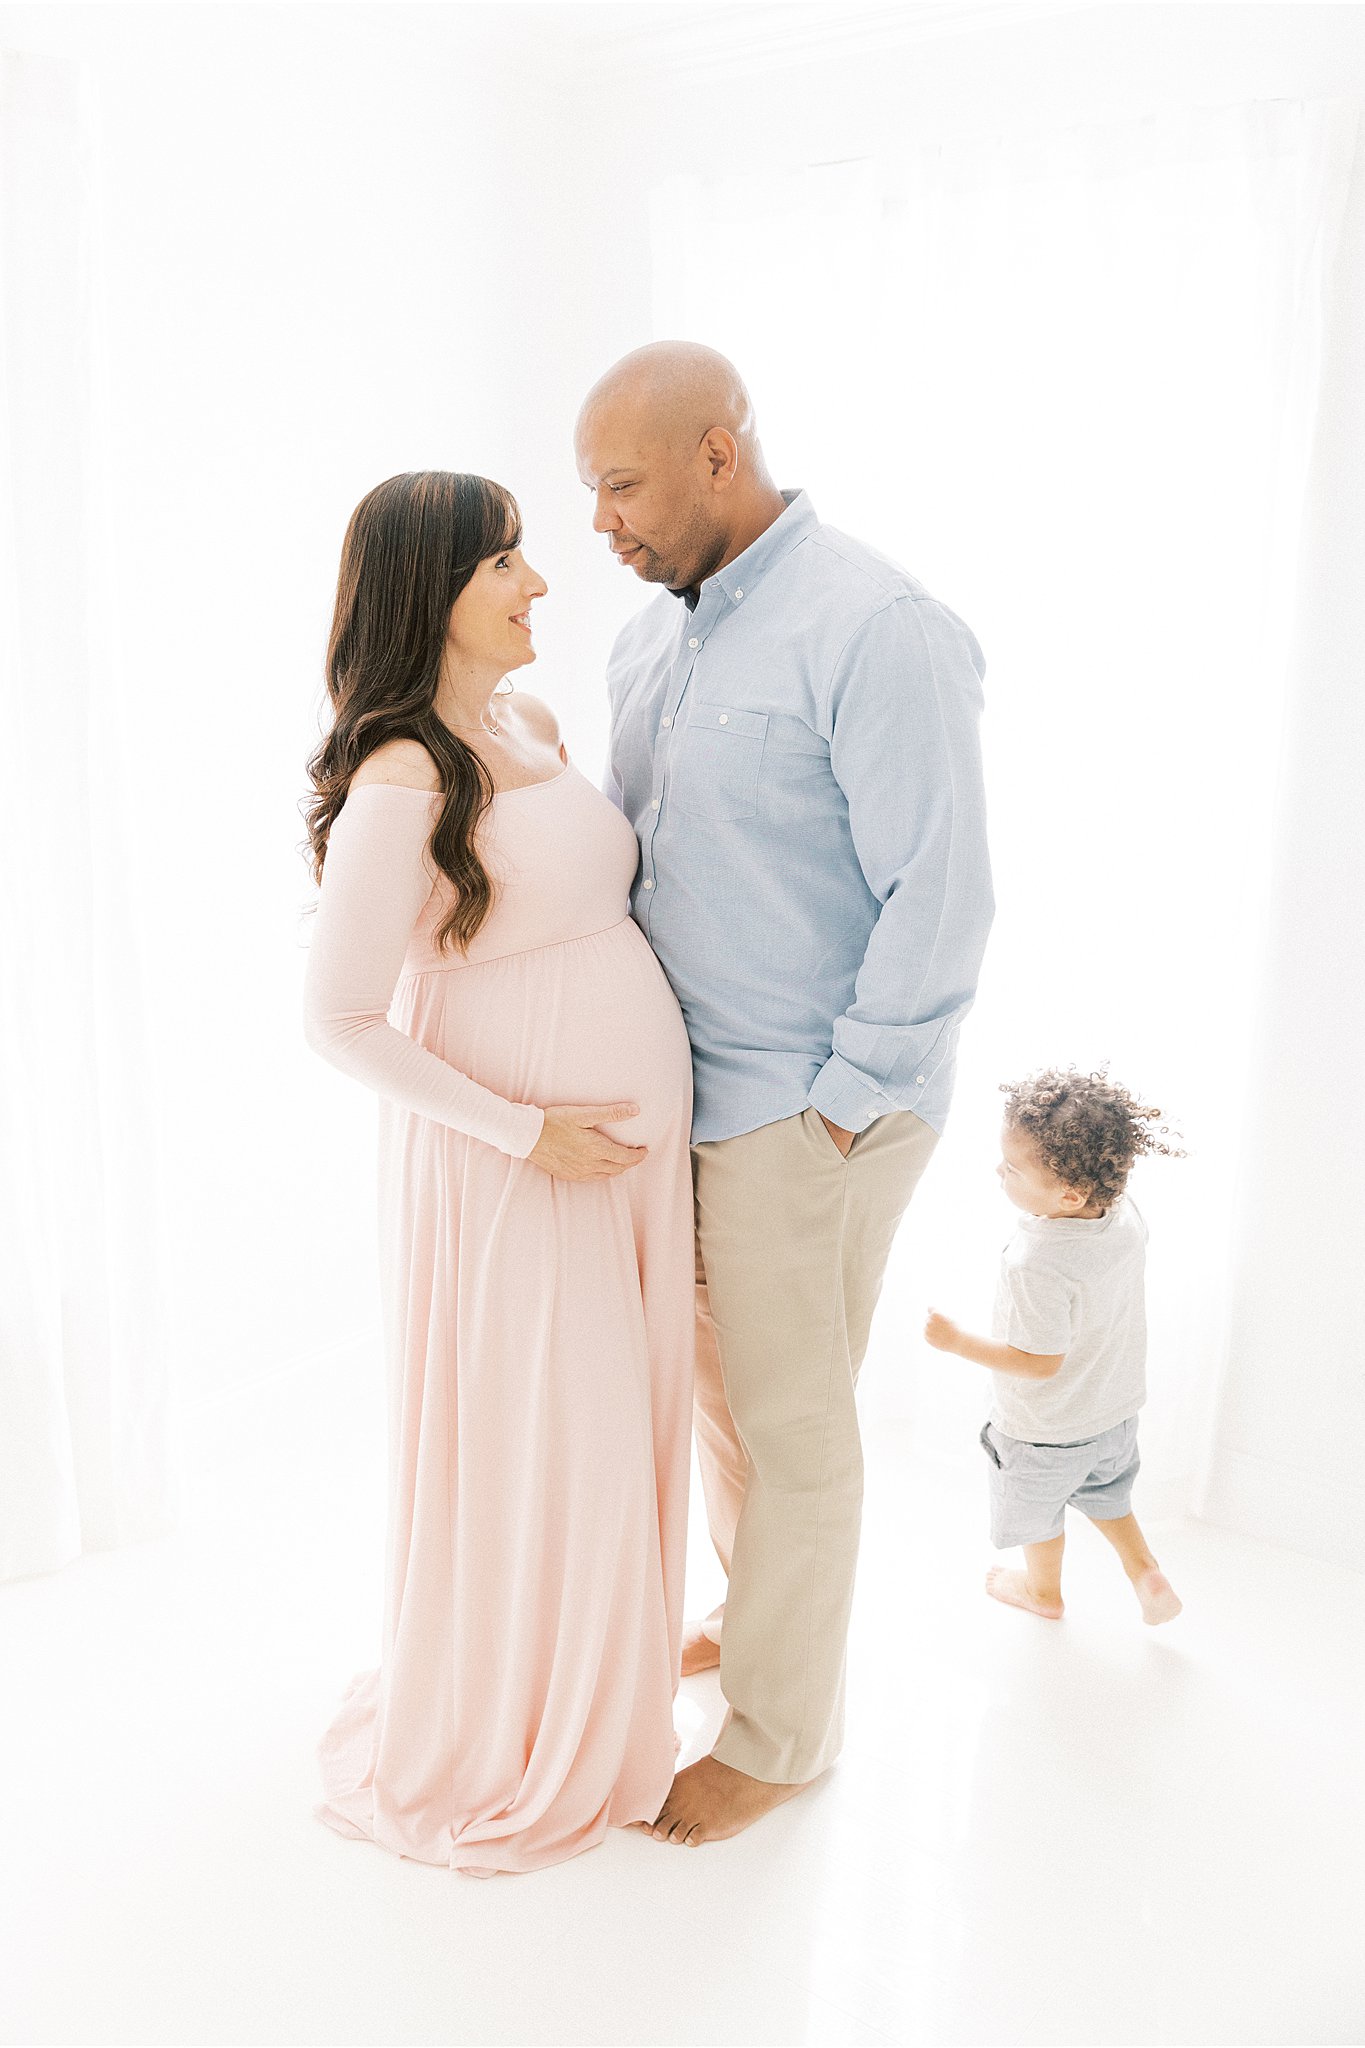 A mom to be stands in a pink maternity gown with her husband while their toddler runs around them after visiting Frisco Birth Center